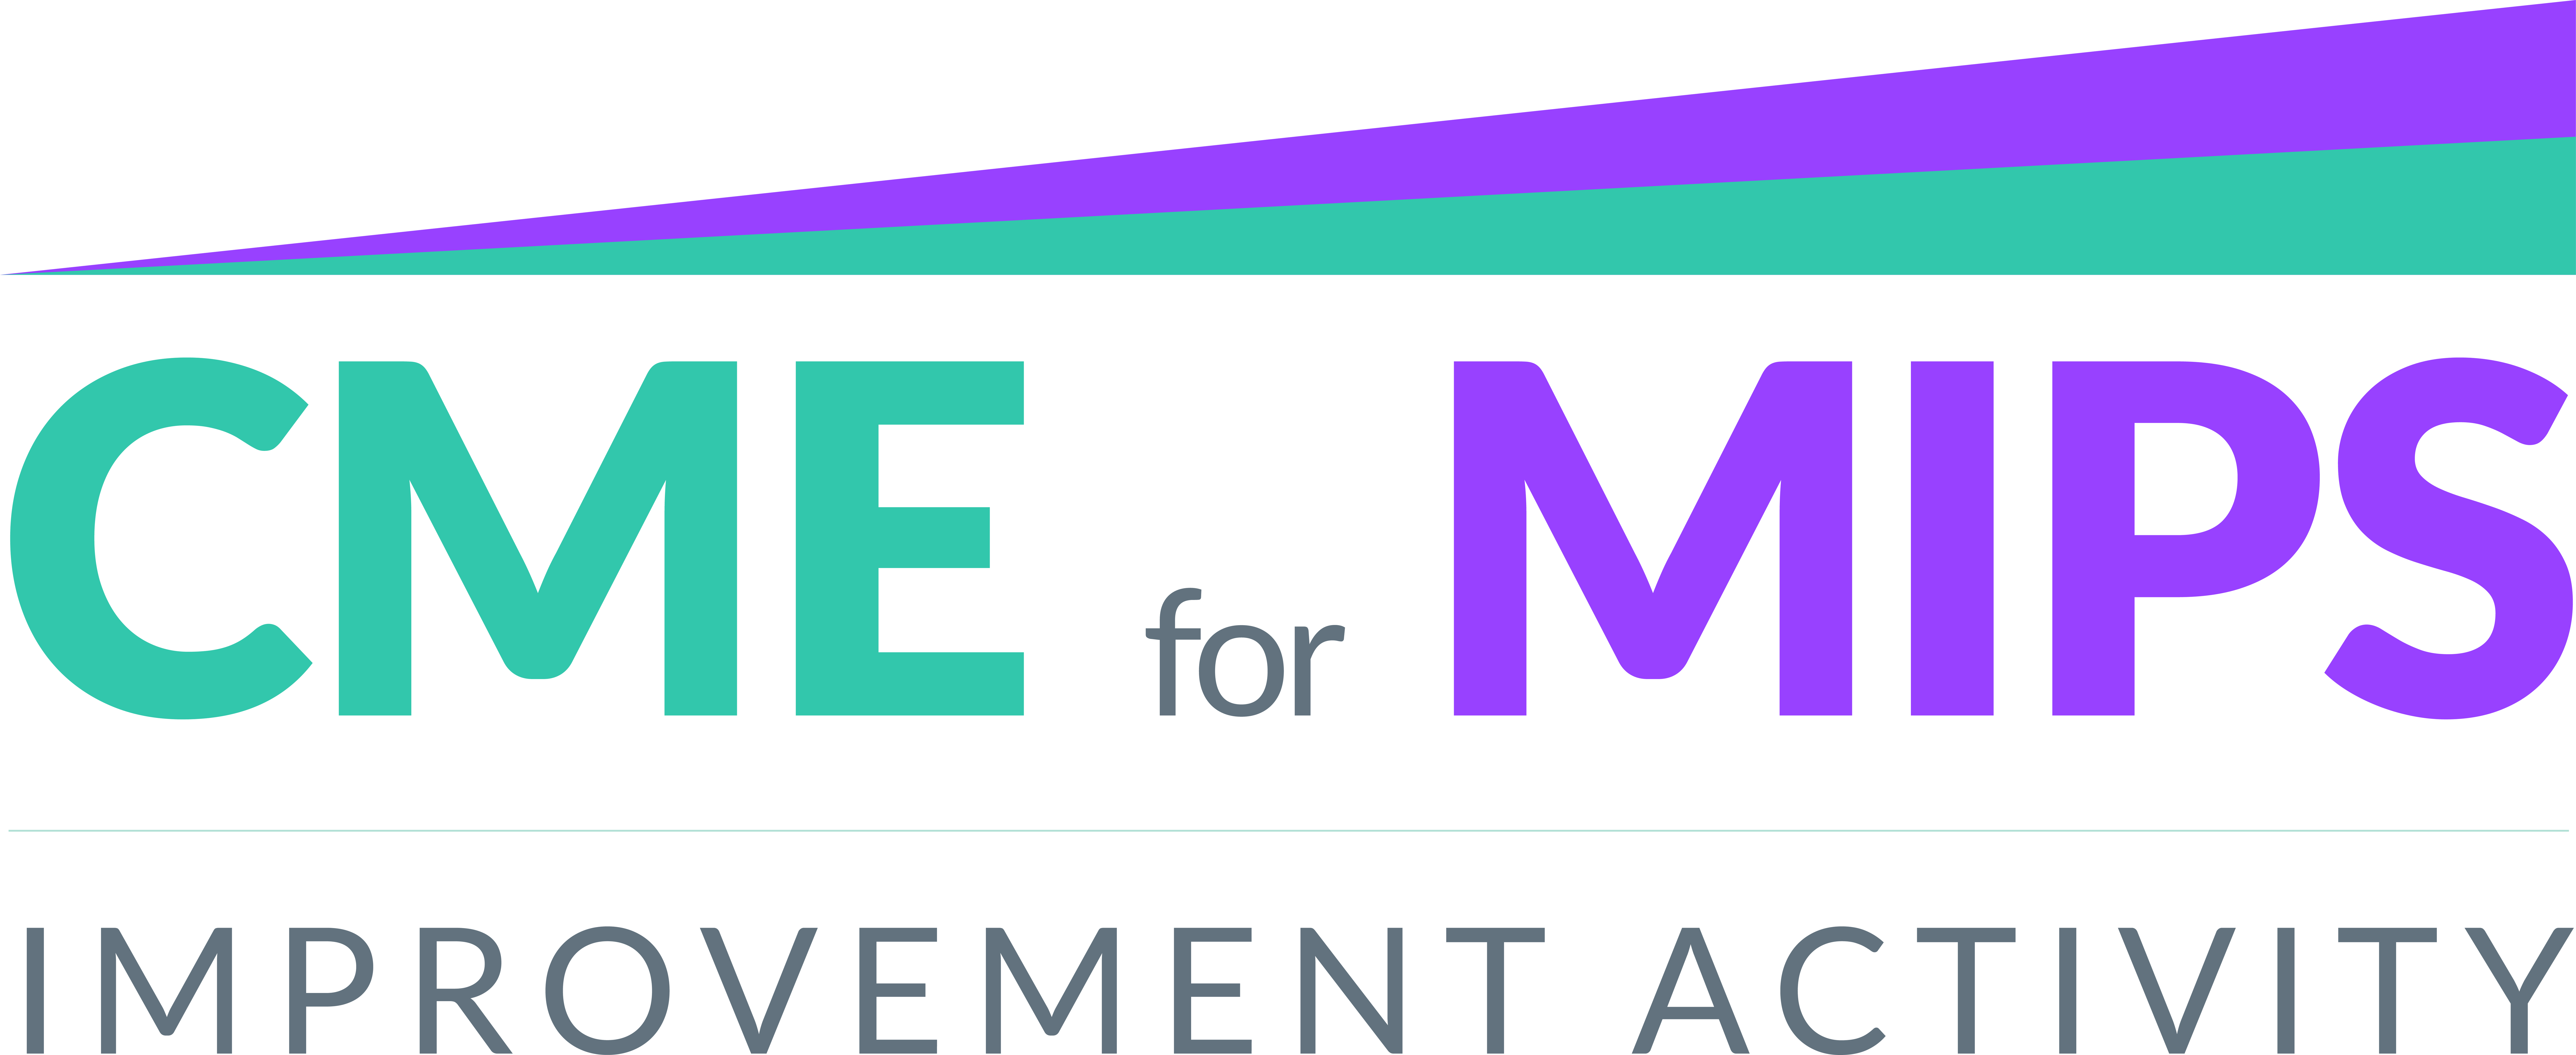 CME for MIPS logo